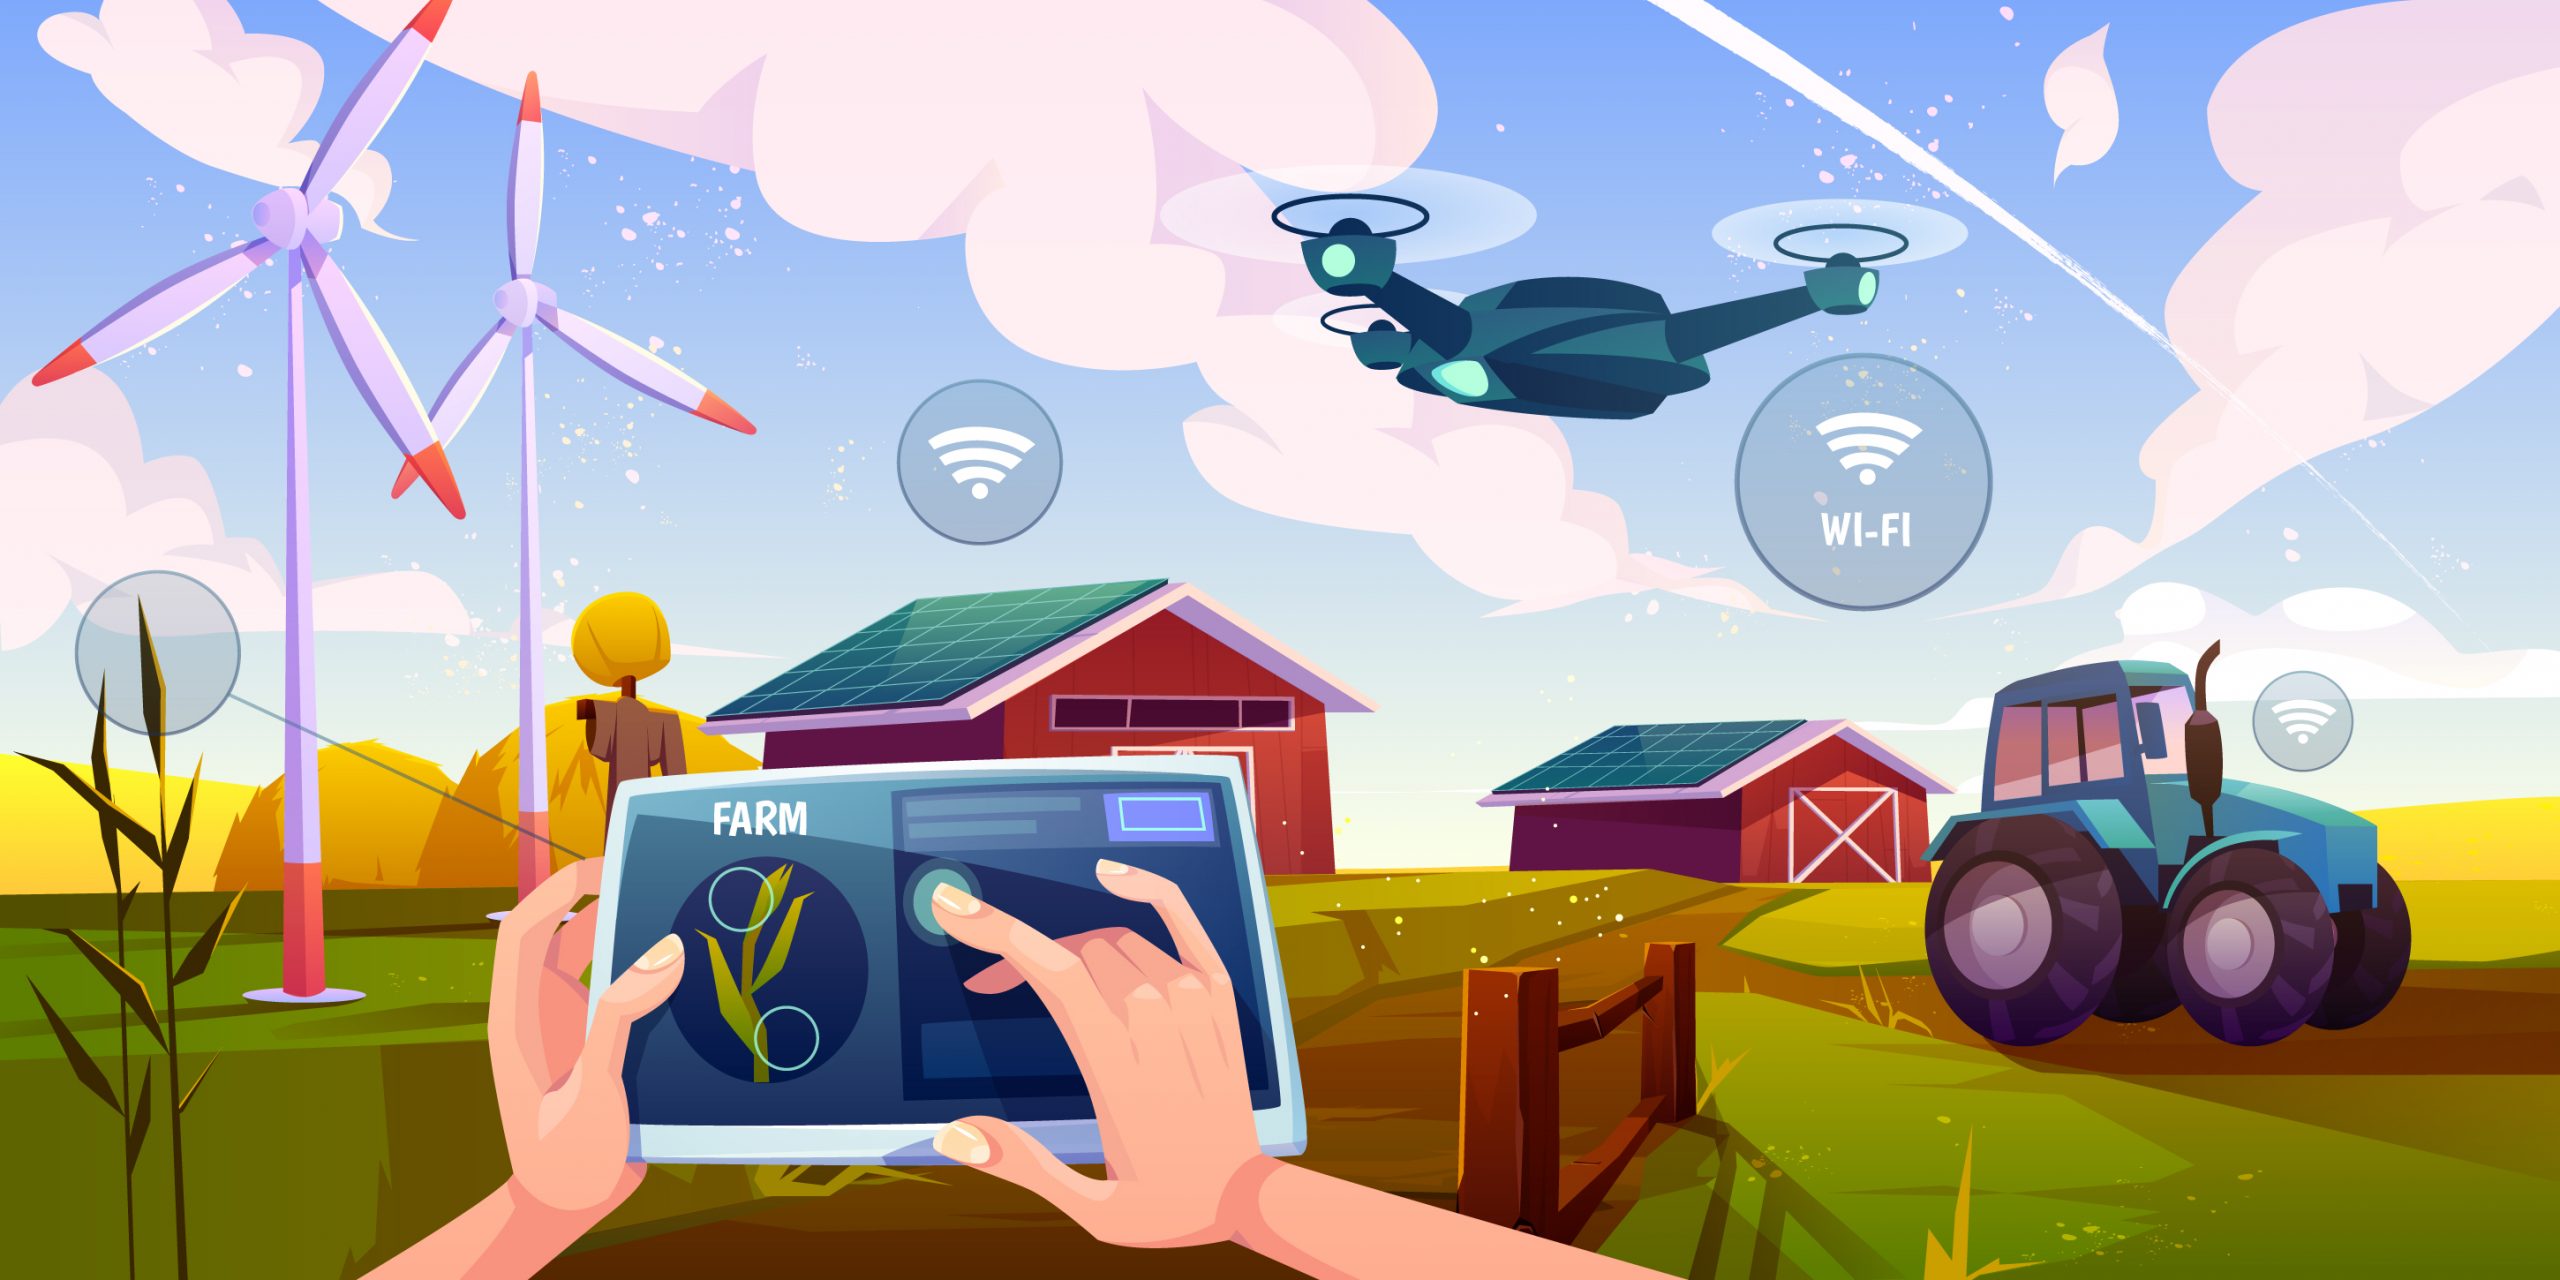 smart farming using TeamViewer IoT software to manage field, windmill, drone, trucks via tablet